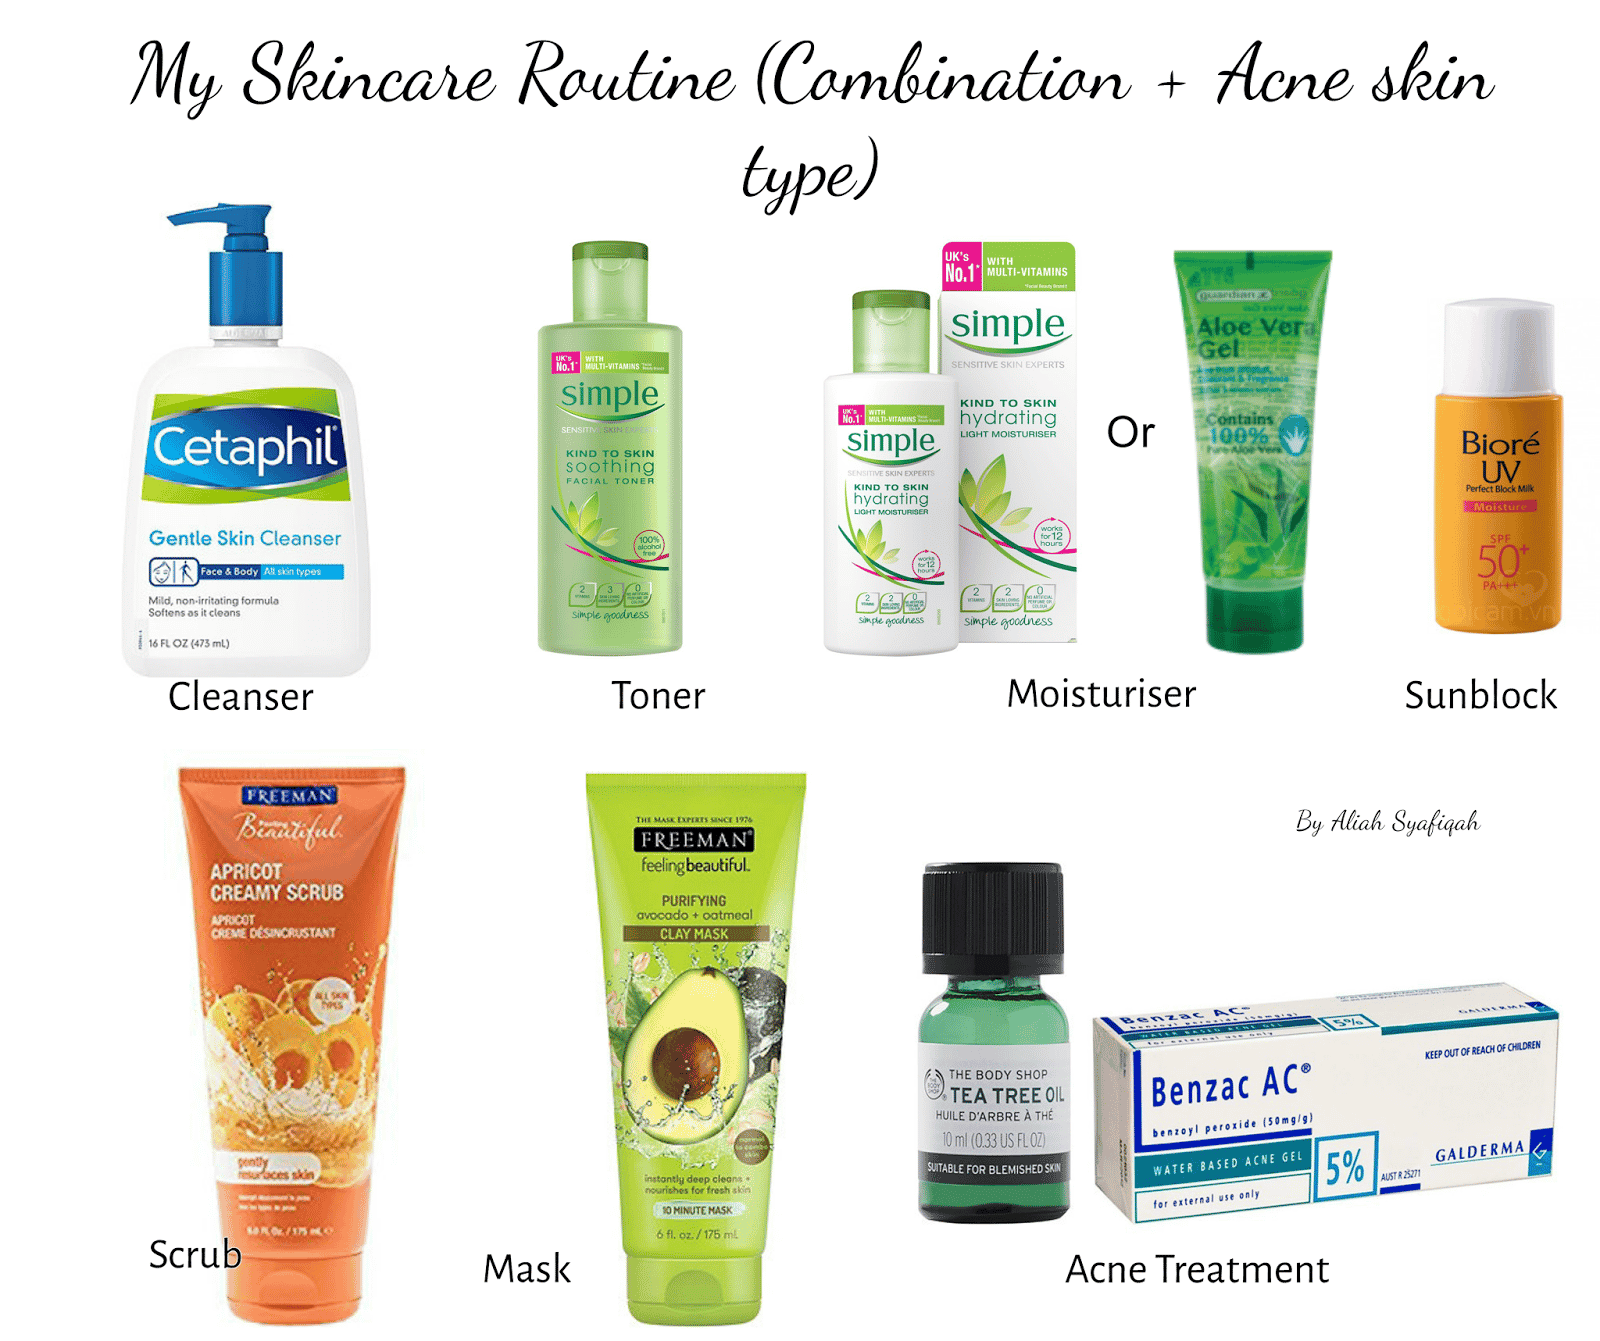 My Skincare Routine (Combination and acne skin)